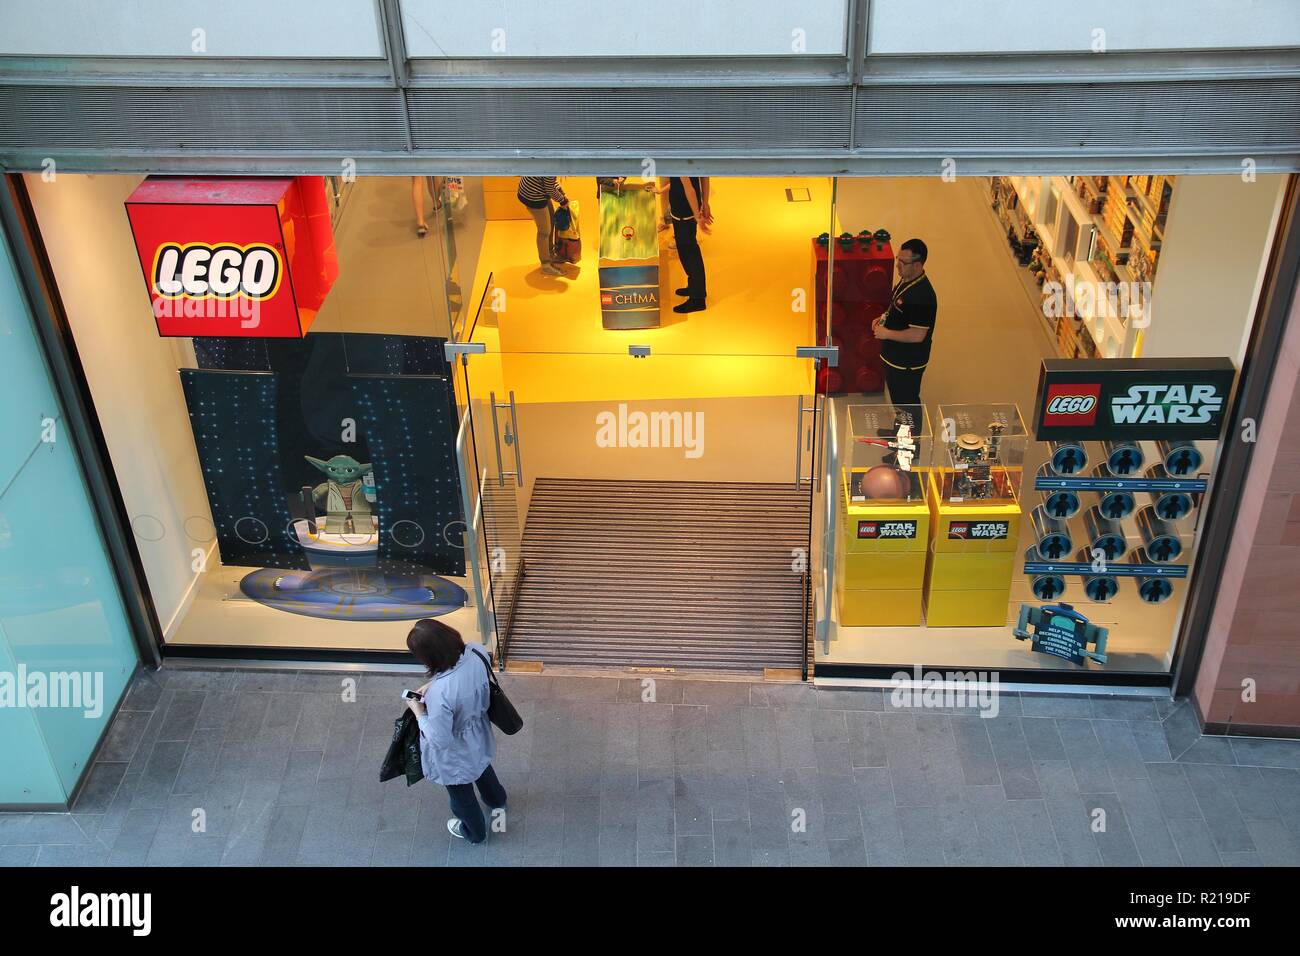 LIVERPOOL, UK - APRIL 20, 2013: People shop at Lego store in Liverpool, UK. Lego Group had 4.7 billion USD revenue in 2013 (with 1.5 billion USD incom Stock Photo